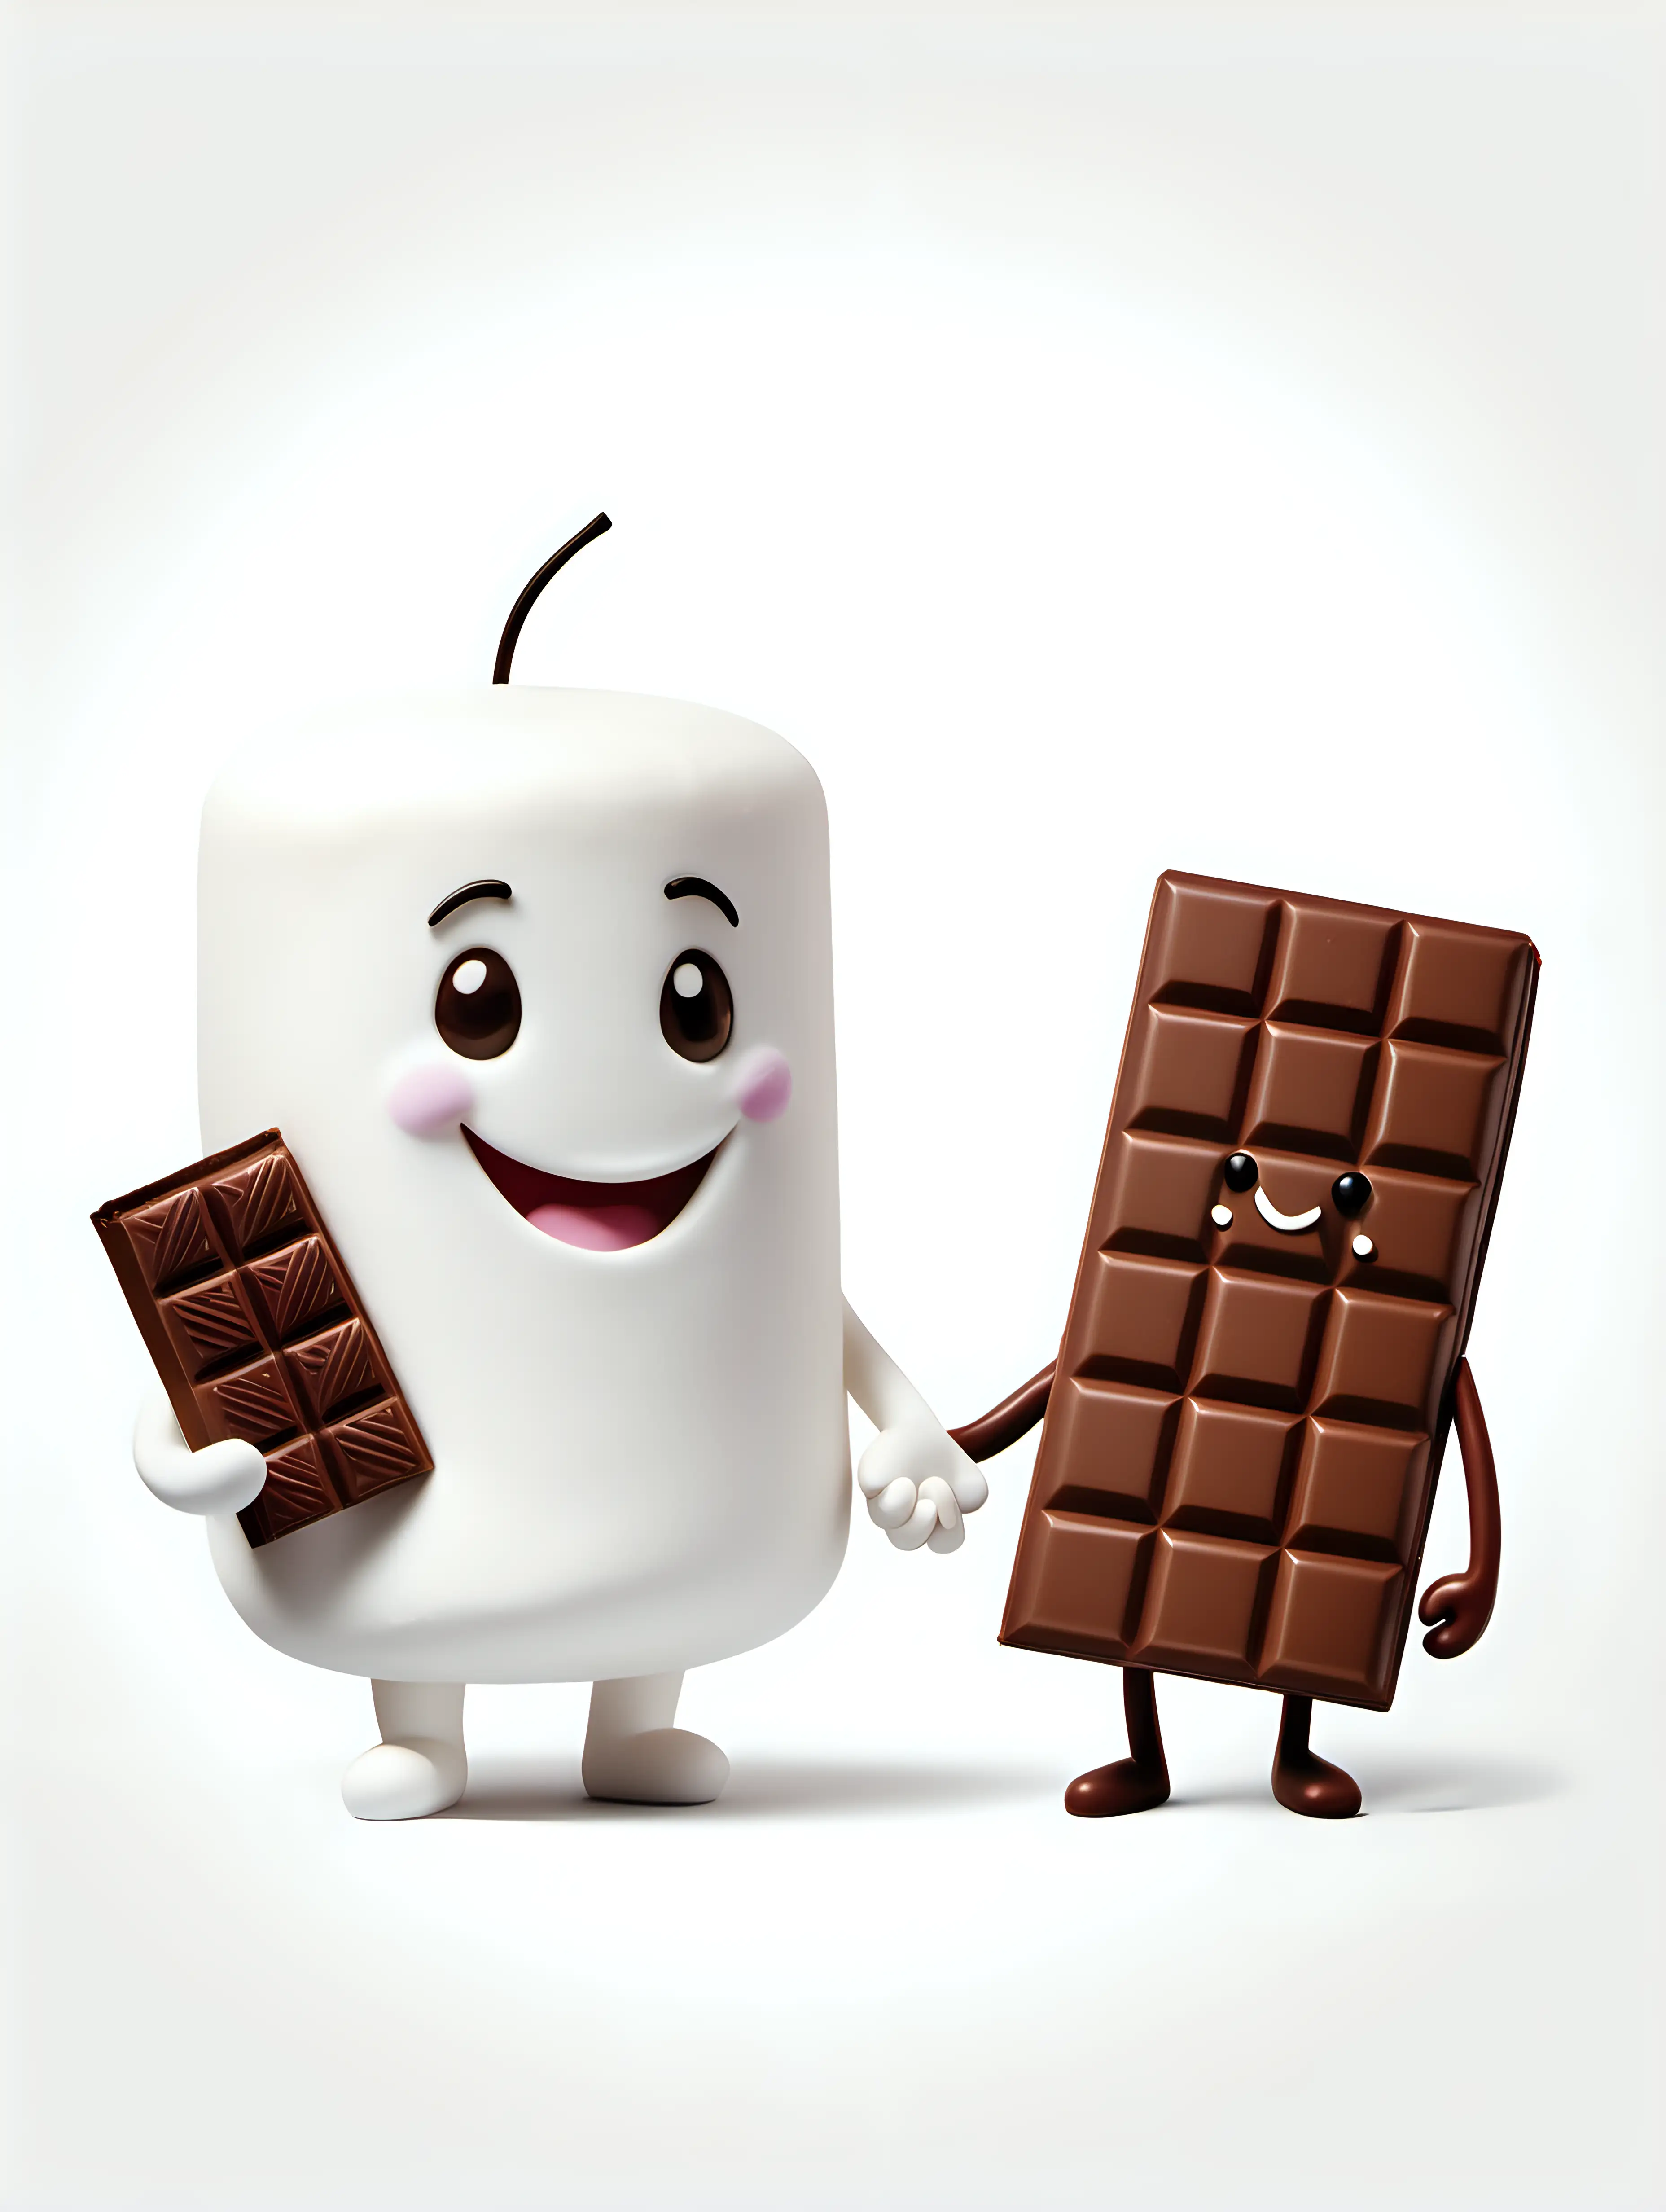 create an illustration of two characters, a marshmallow character and a bar of chocolate character, holding hands, smiling, white background
